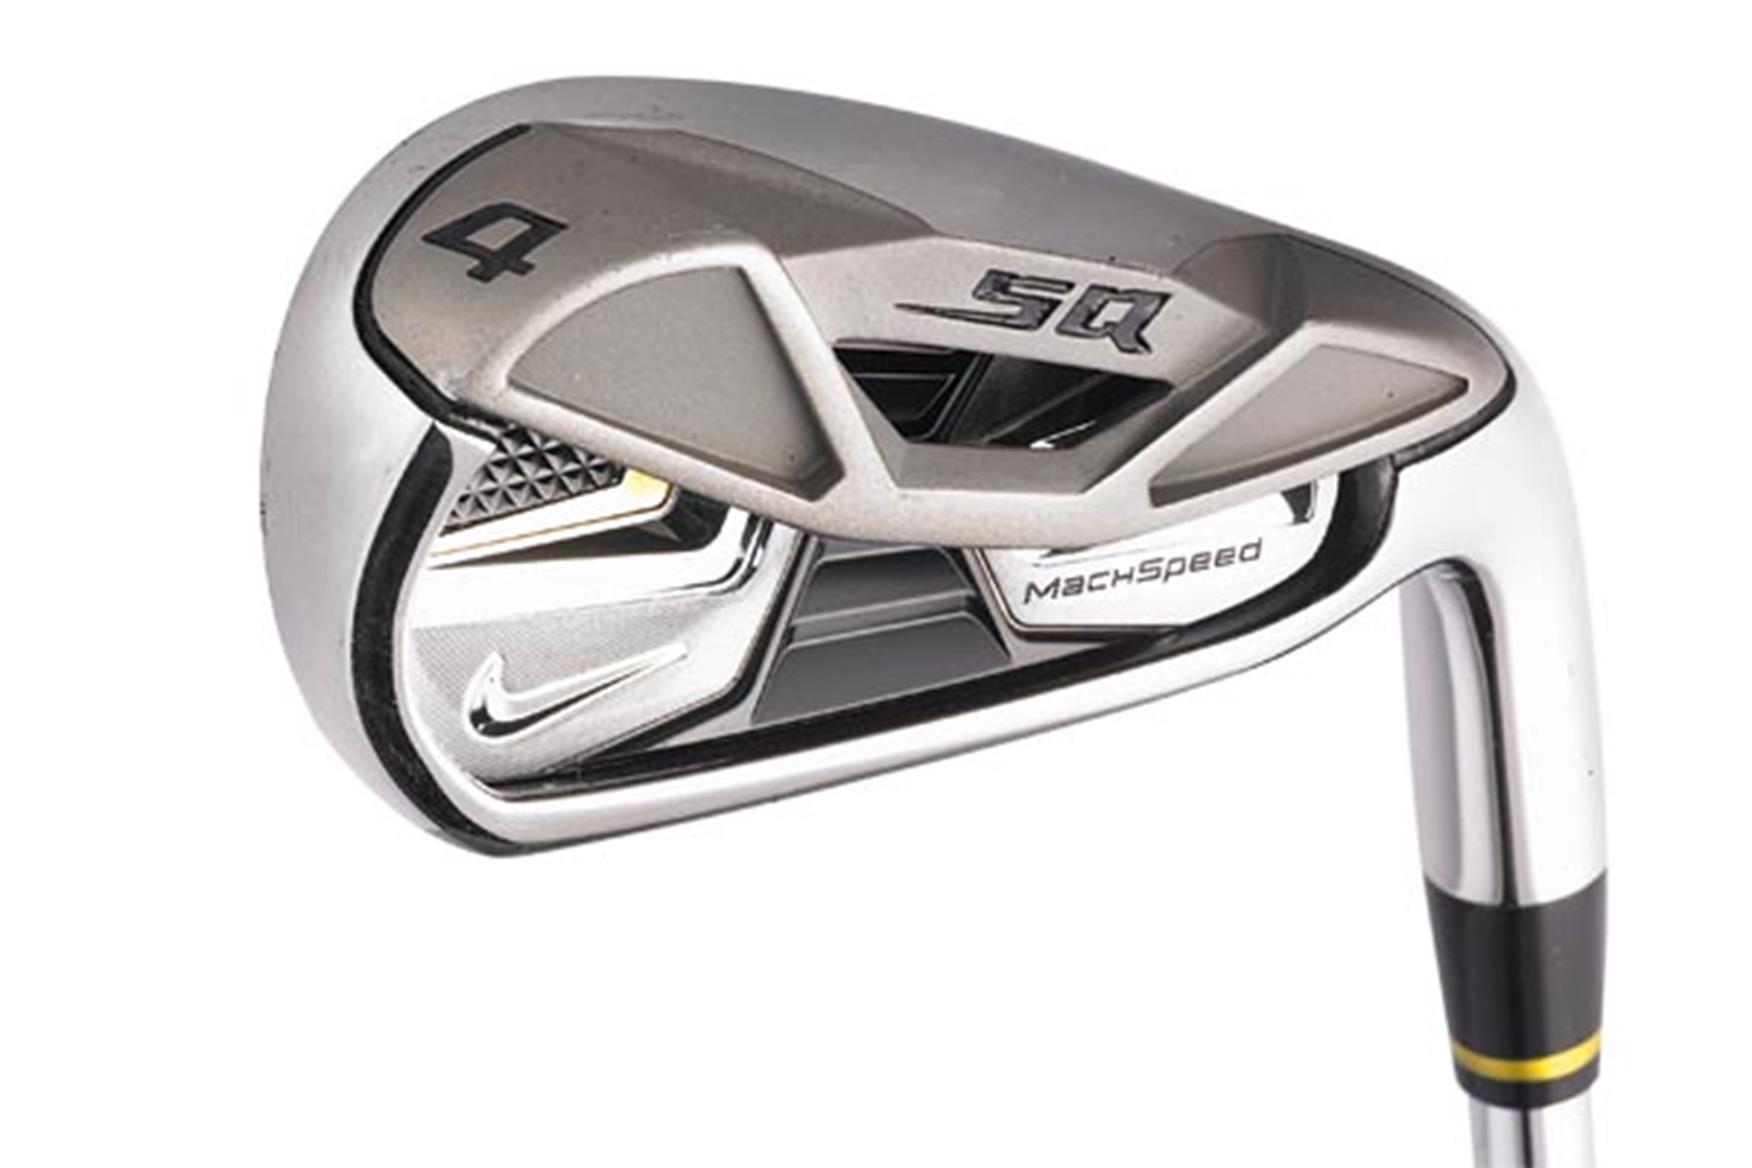 nike sq machspeed irons review 